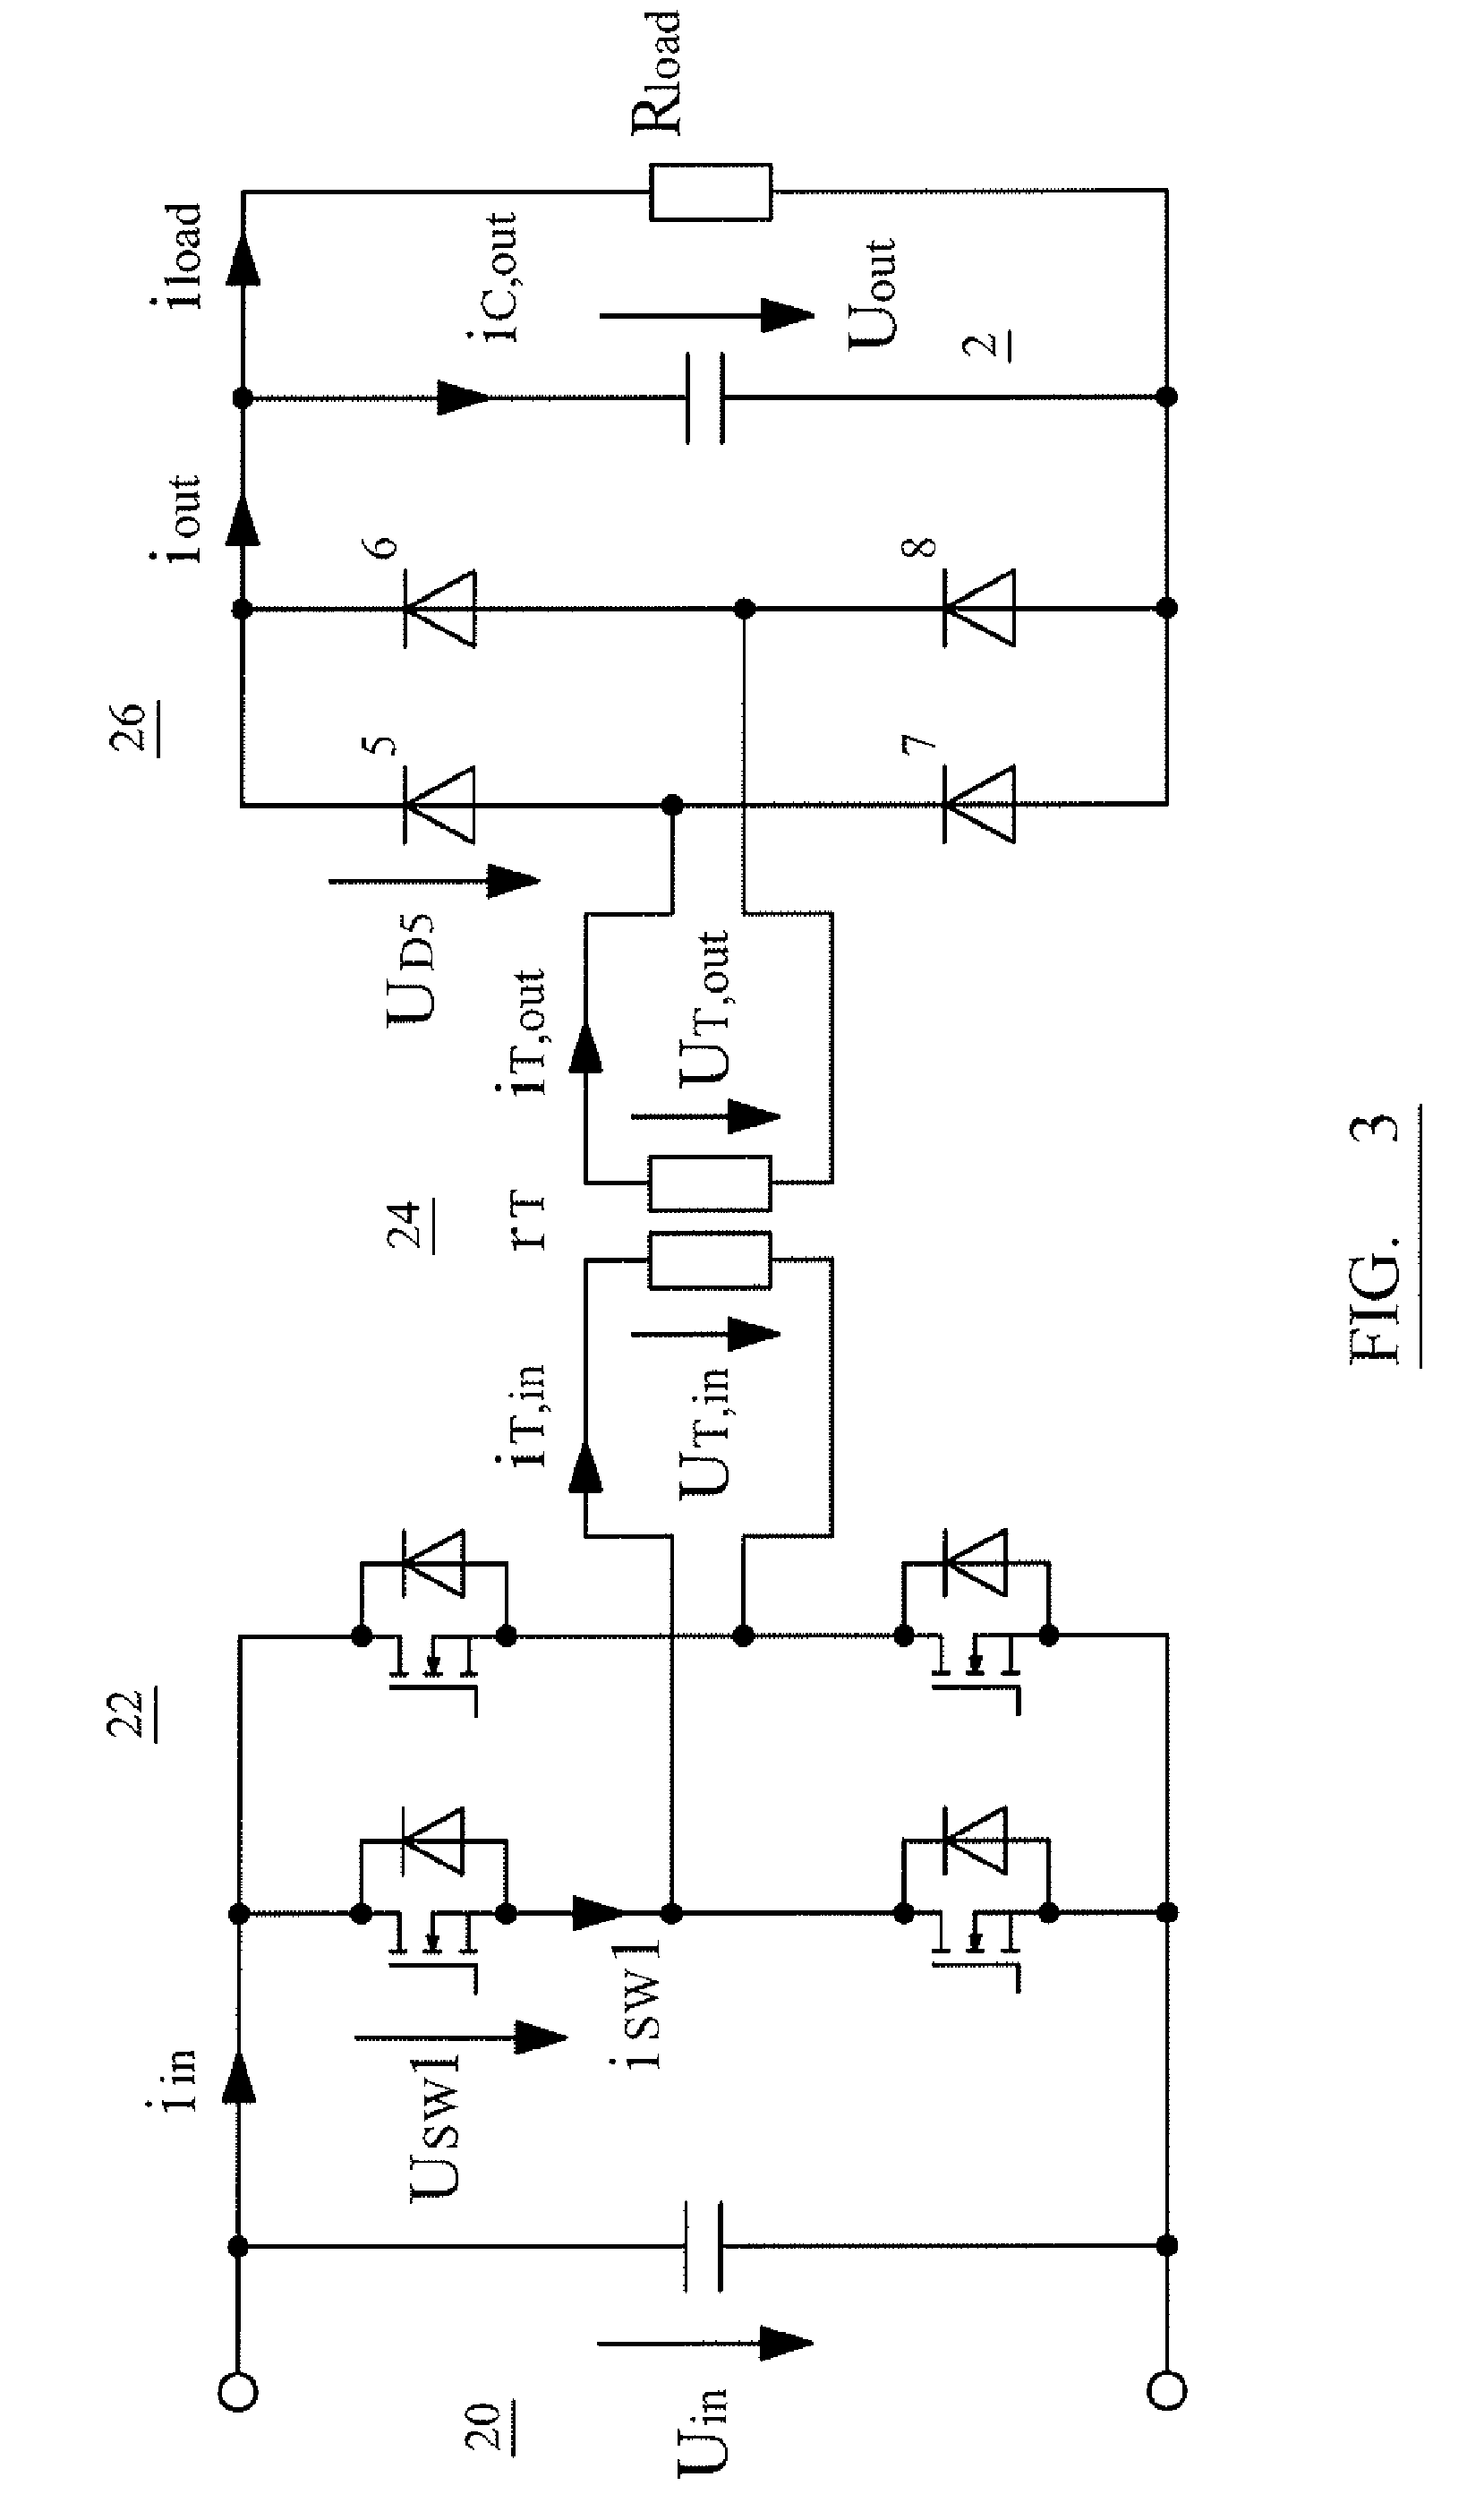 Power transmission system for use with downhole equipment